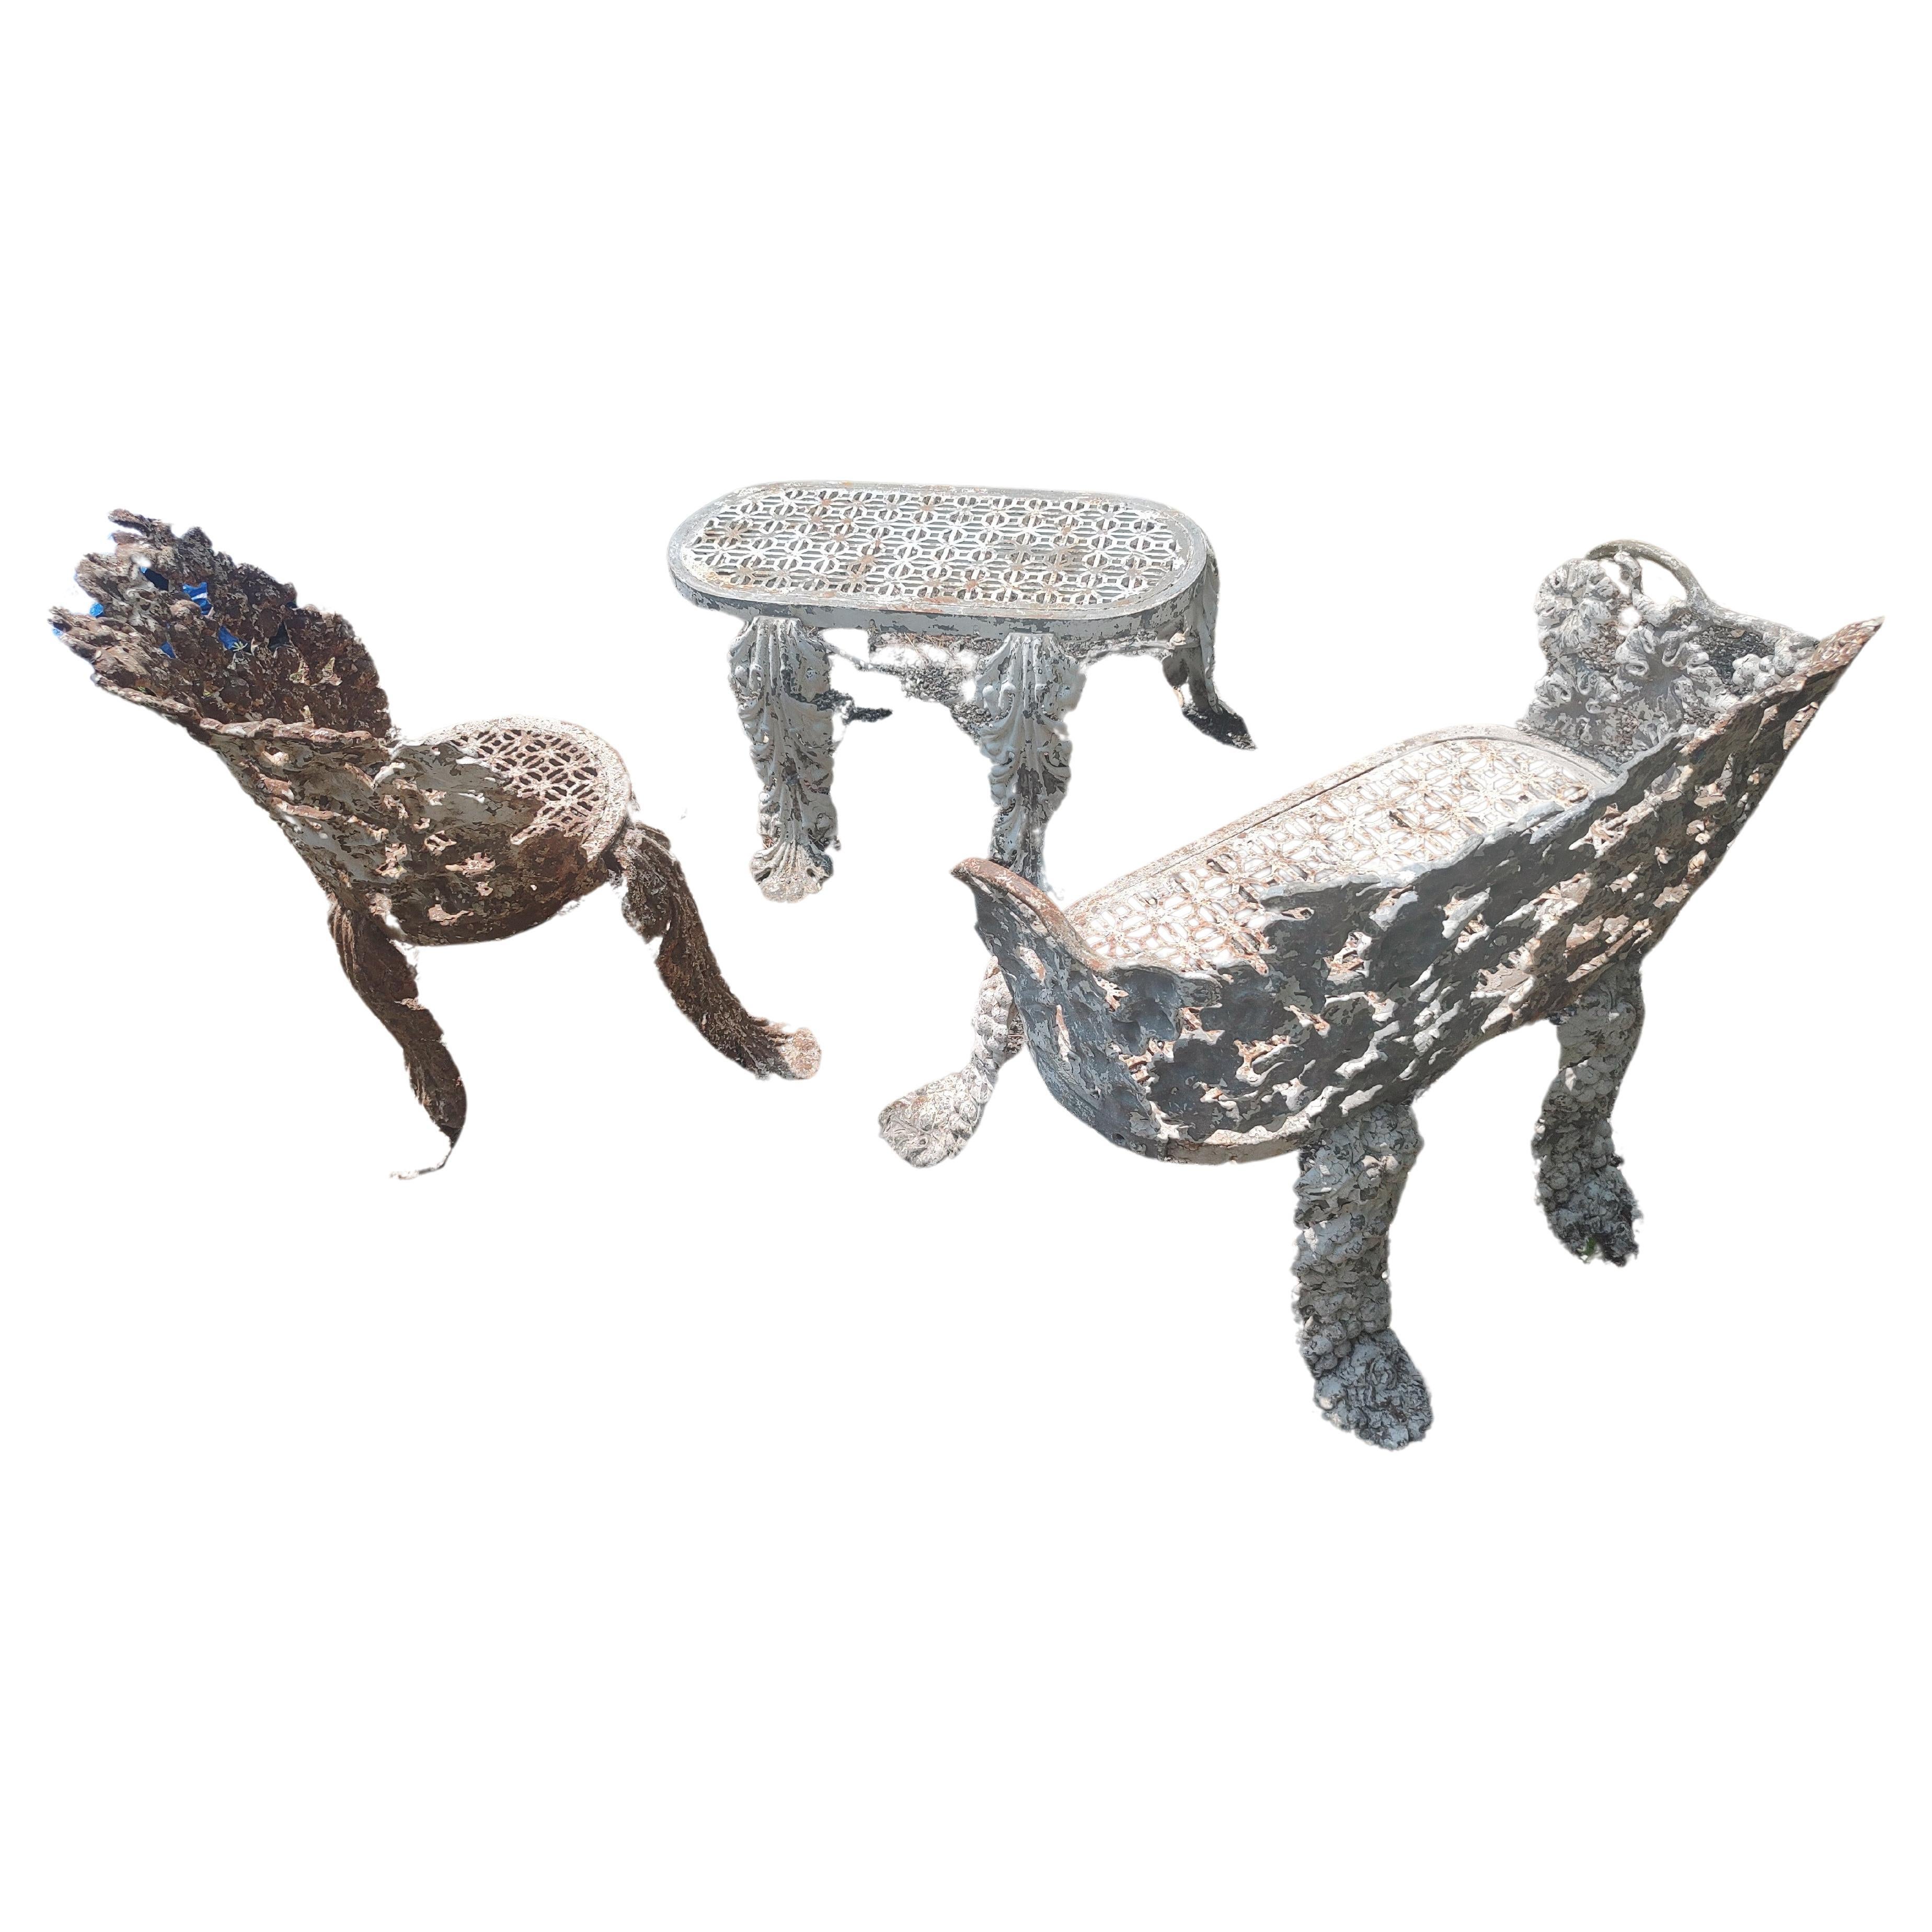 Antique Late 19th C Cast Iron 3 Piece Garden Set Bench a Chair and a Table Chair In Good Condition For Sale In Port Jervis, NY